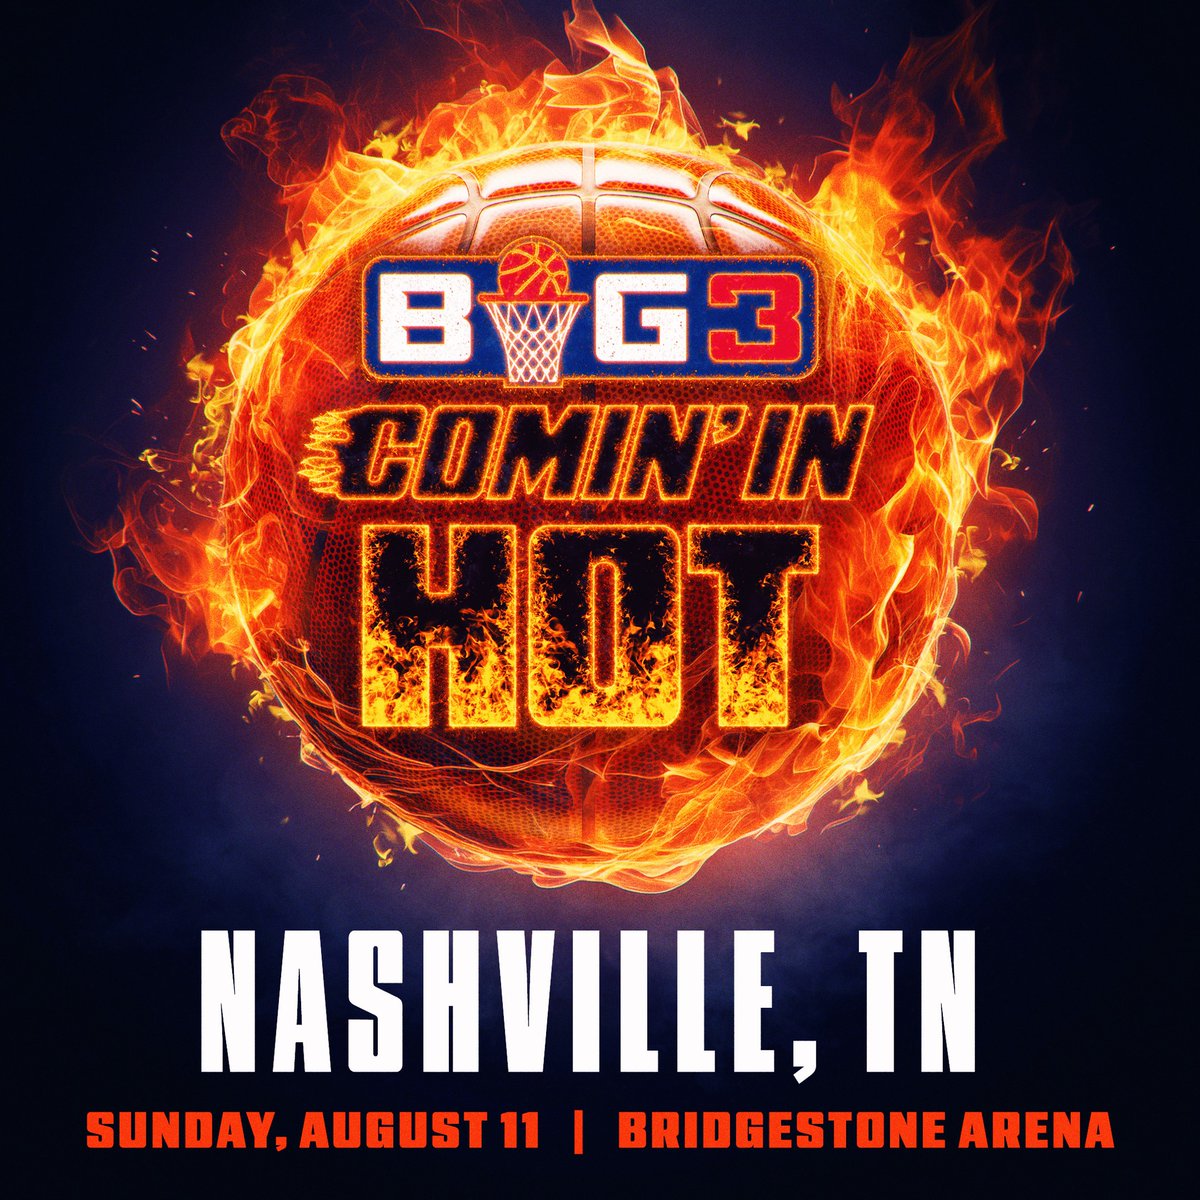 🏀 @thebig3 PRESALE: See the 3-on-3 pro basketball league featuring All-Stars, Hall of Famers and World Champions at Bridgestone Arena on August 11! 🔥 Use the code FIREBALL20 to get 20% off on select presale tickets before tonight at 10pm. 🎟️: bit.ly/43OwgvH